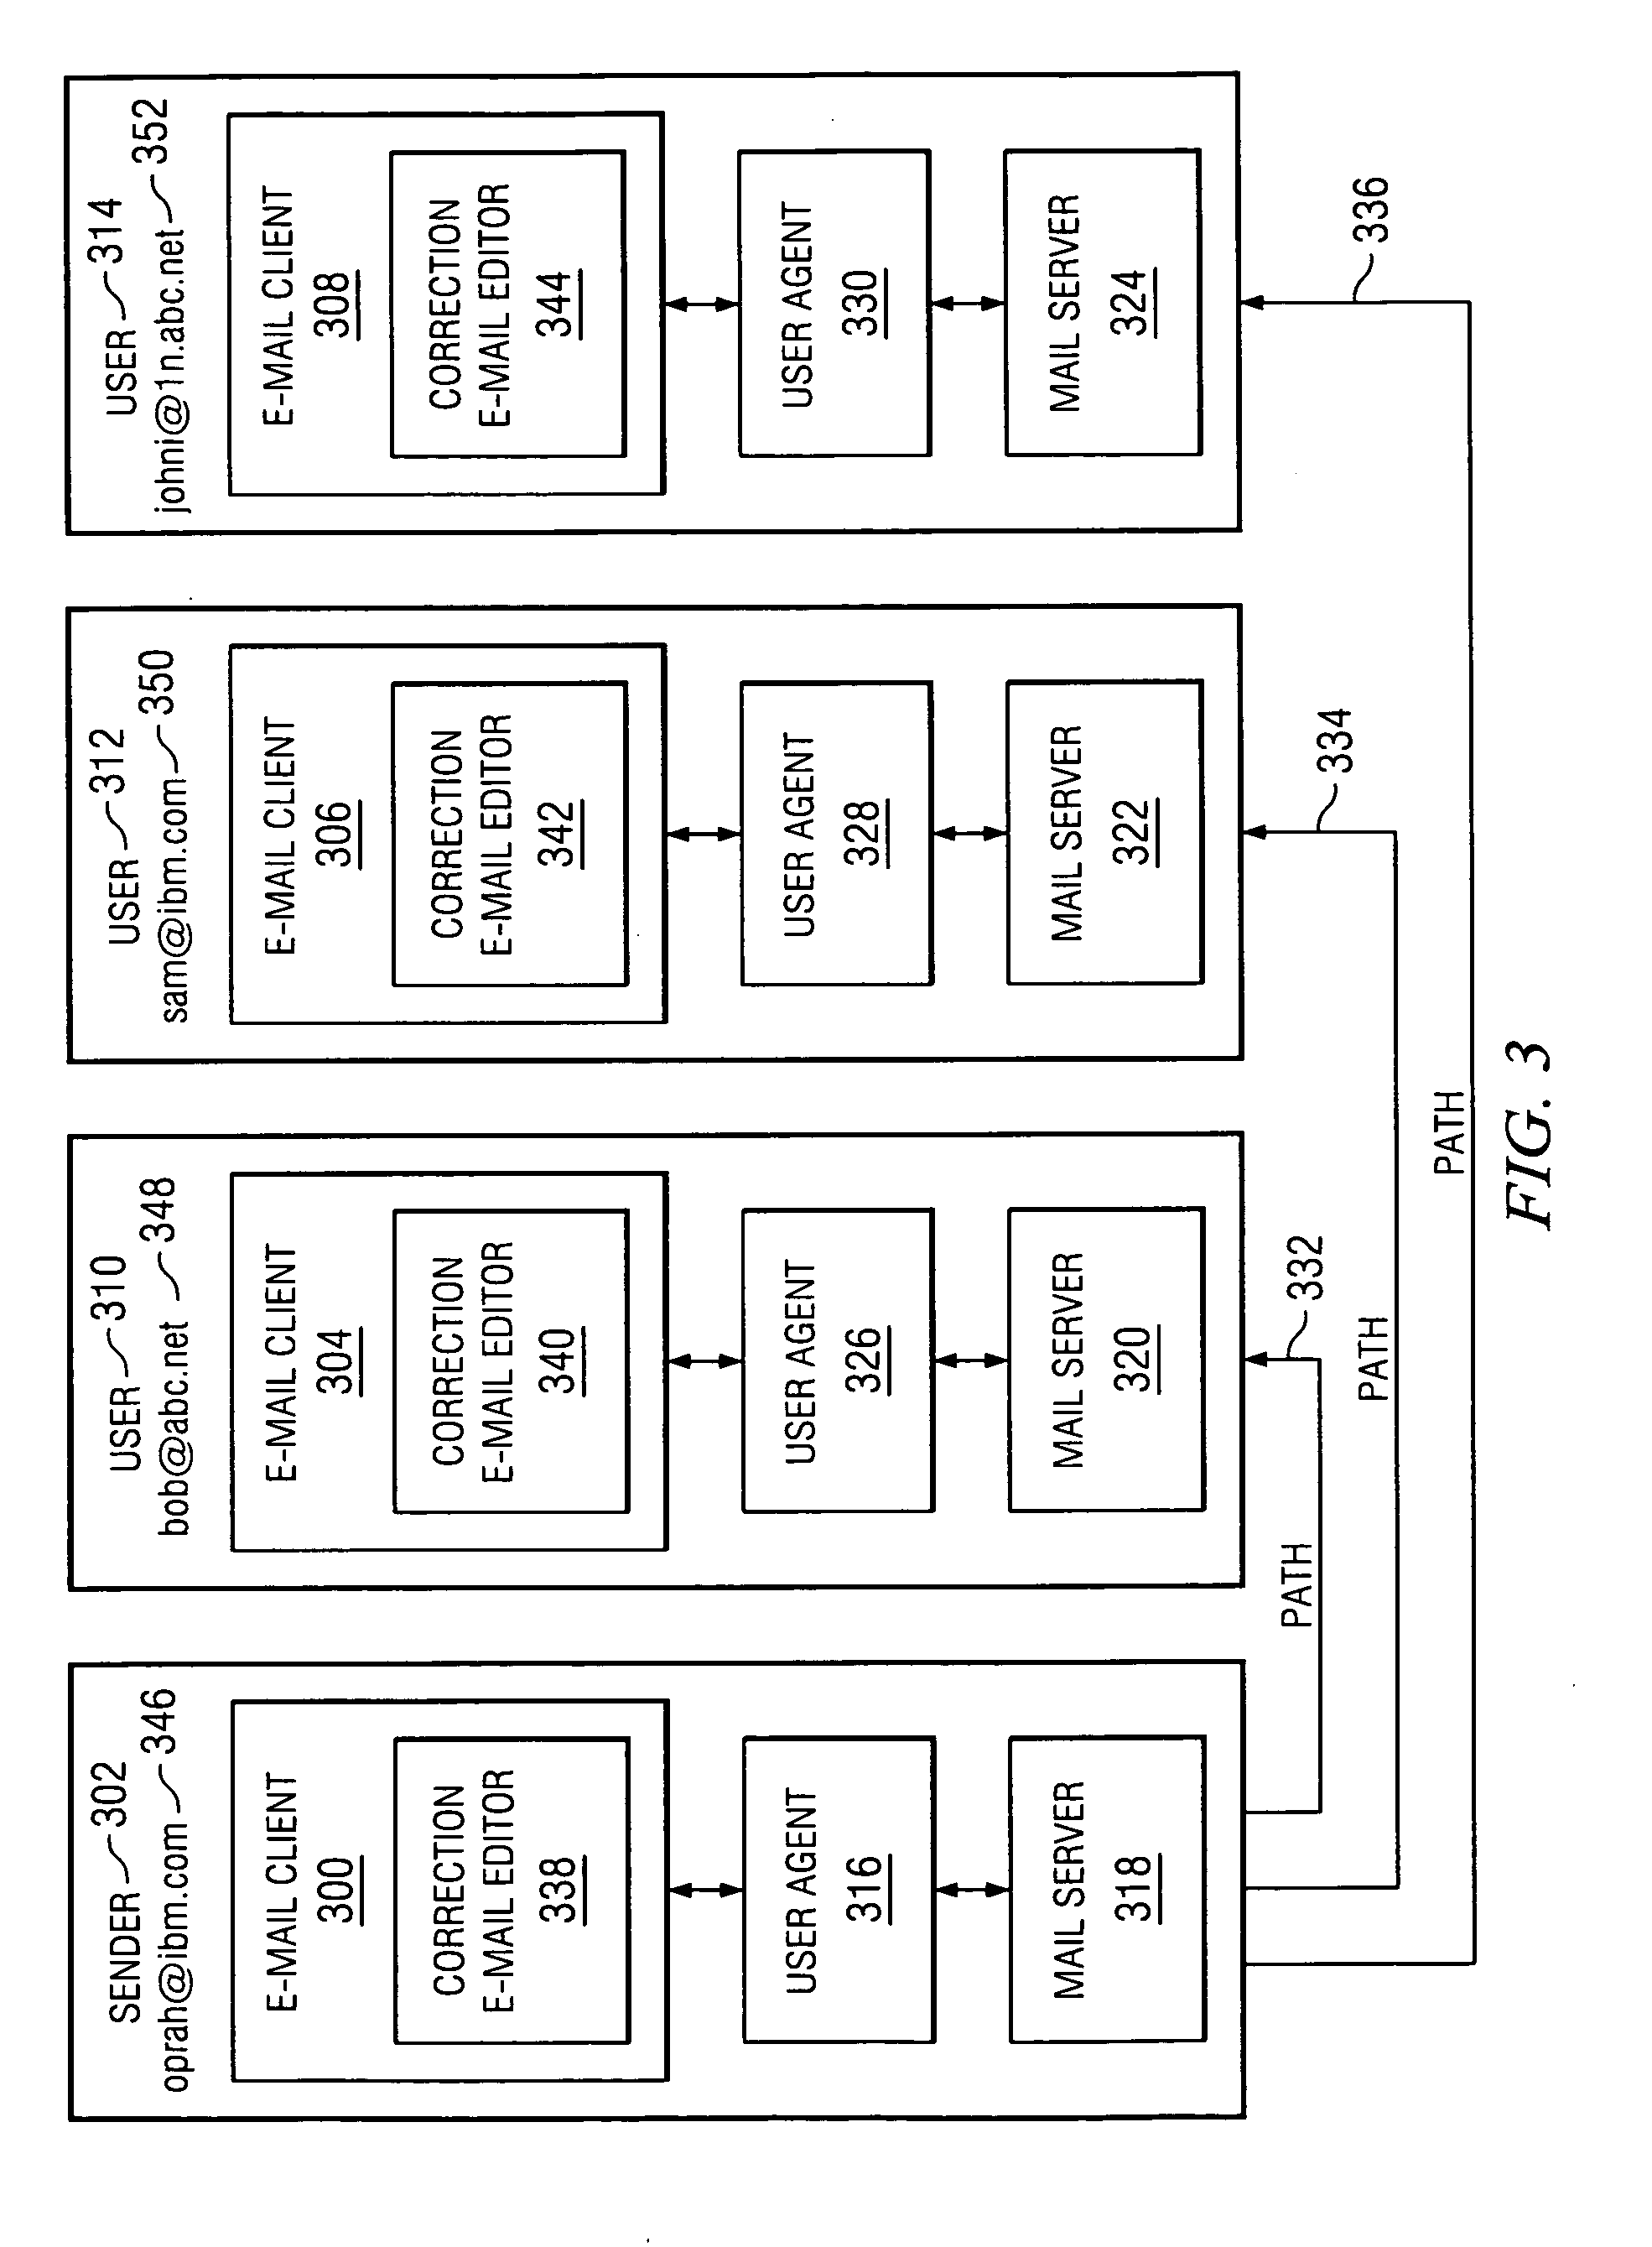 Method for correcting a received electronic mail having an erroneous header